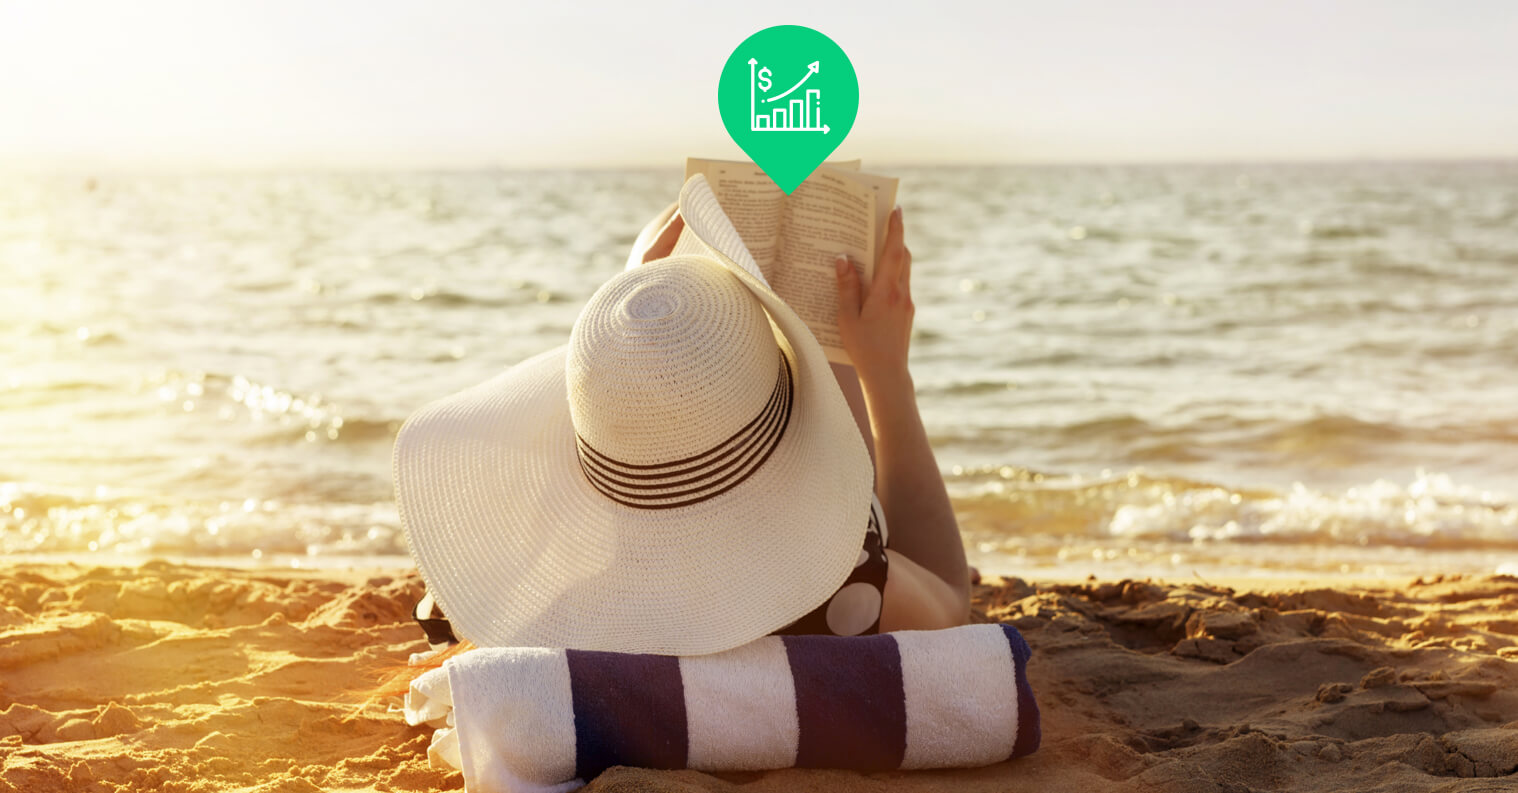 Get ahead on your financial goals, with some smart summer reads.